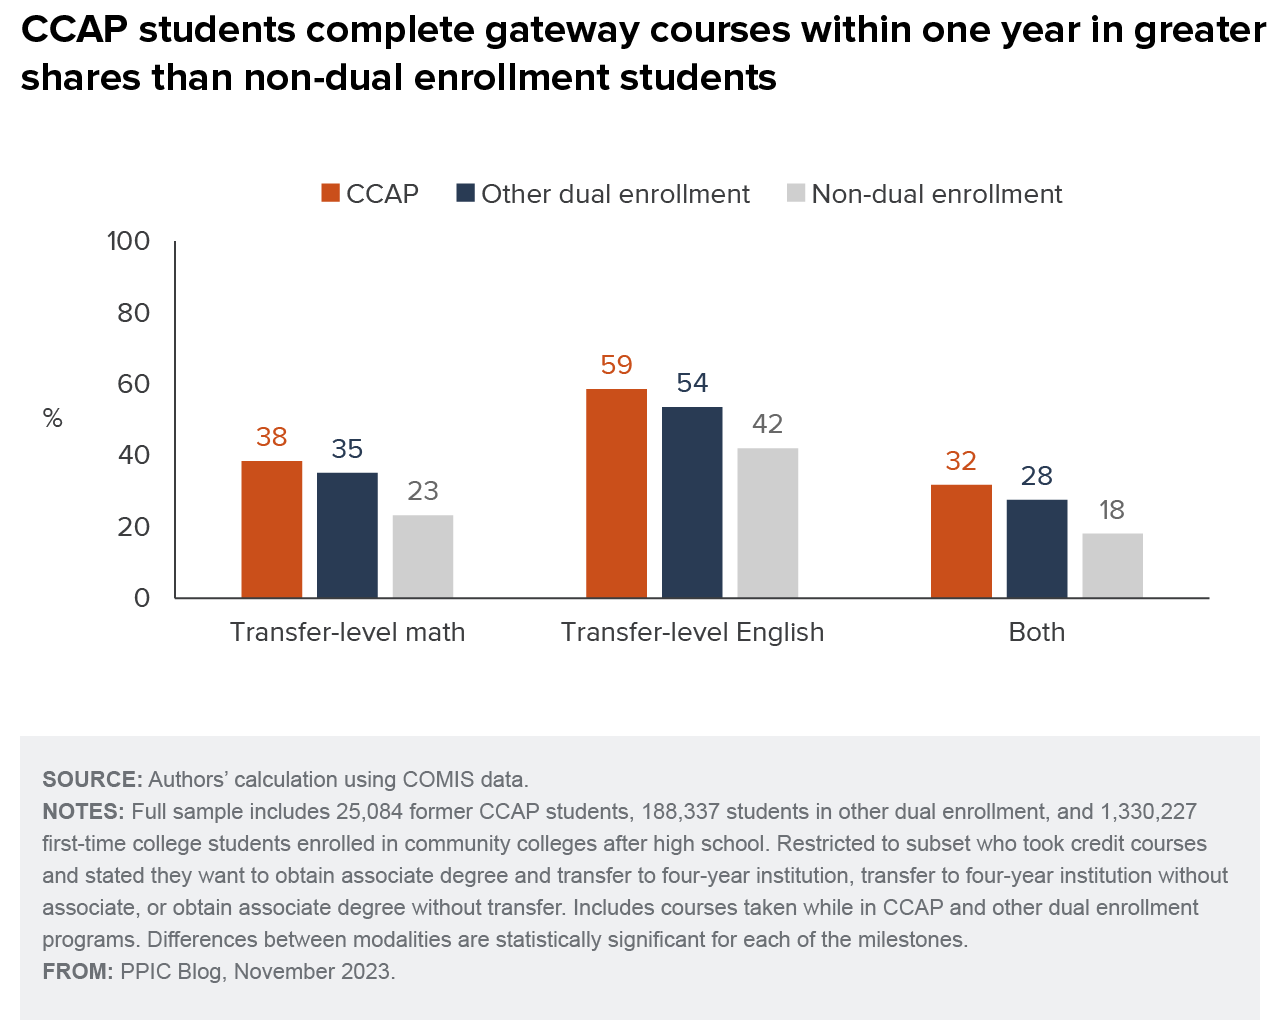 figure - CCAP students complete gateway courses within one year in greater shares than non-dual enrollment students